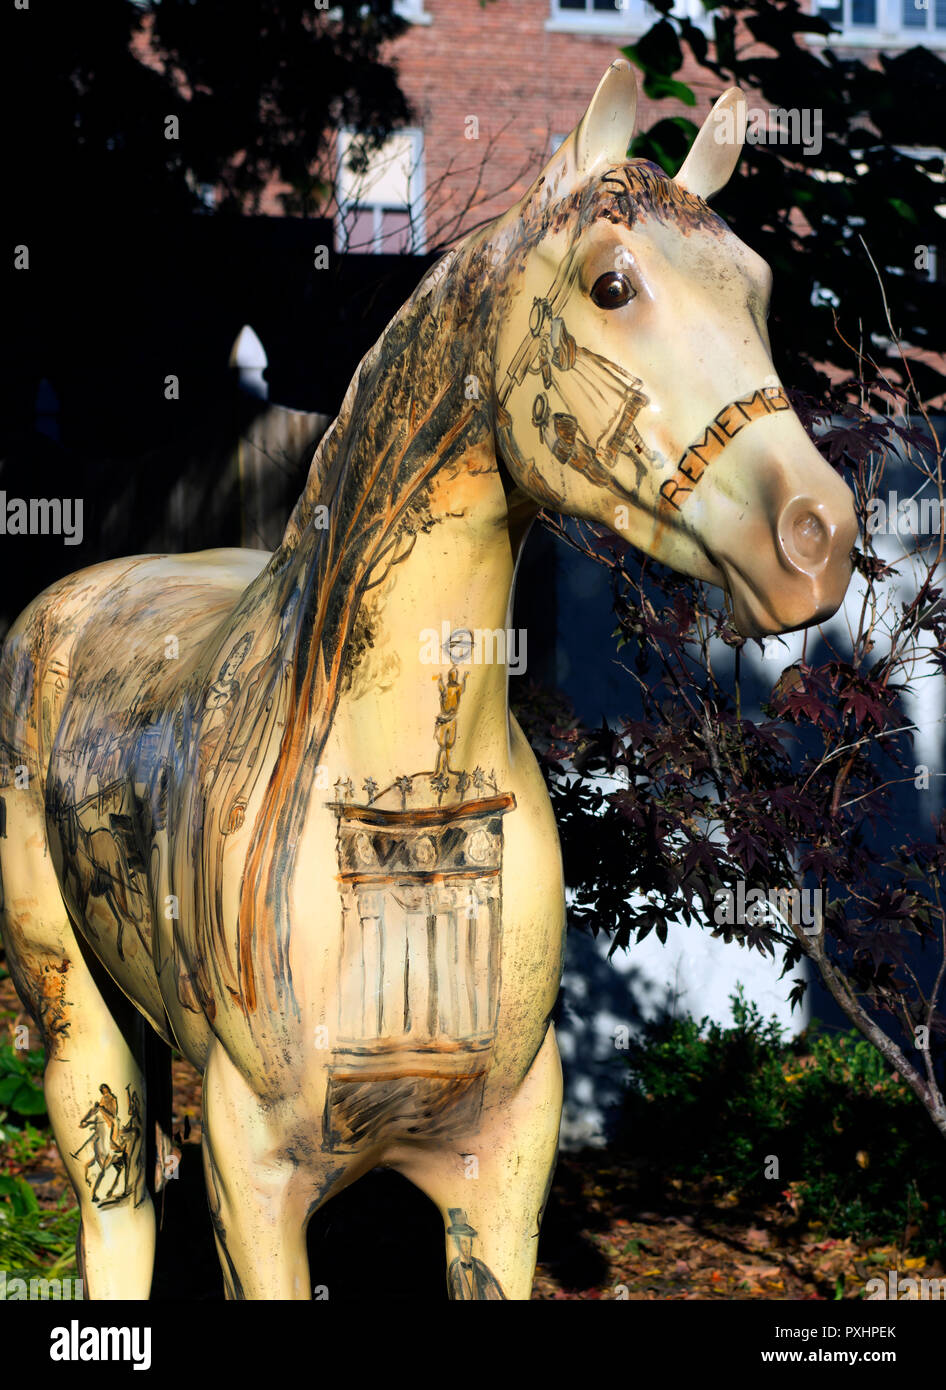 An example of horse decor found throughout downtown Saratoga Springs, NY, USA Stock Photo